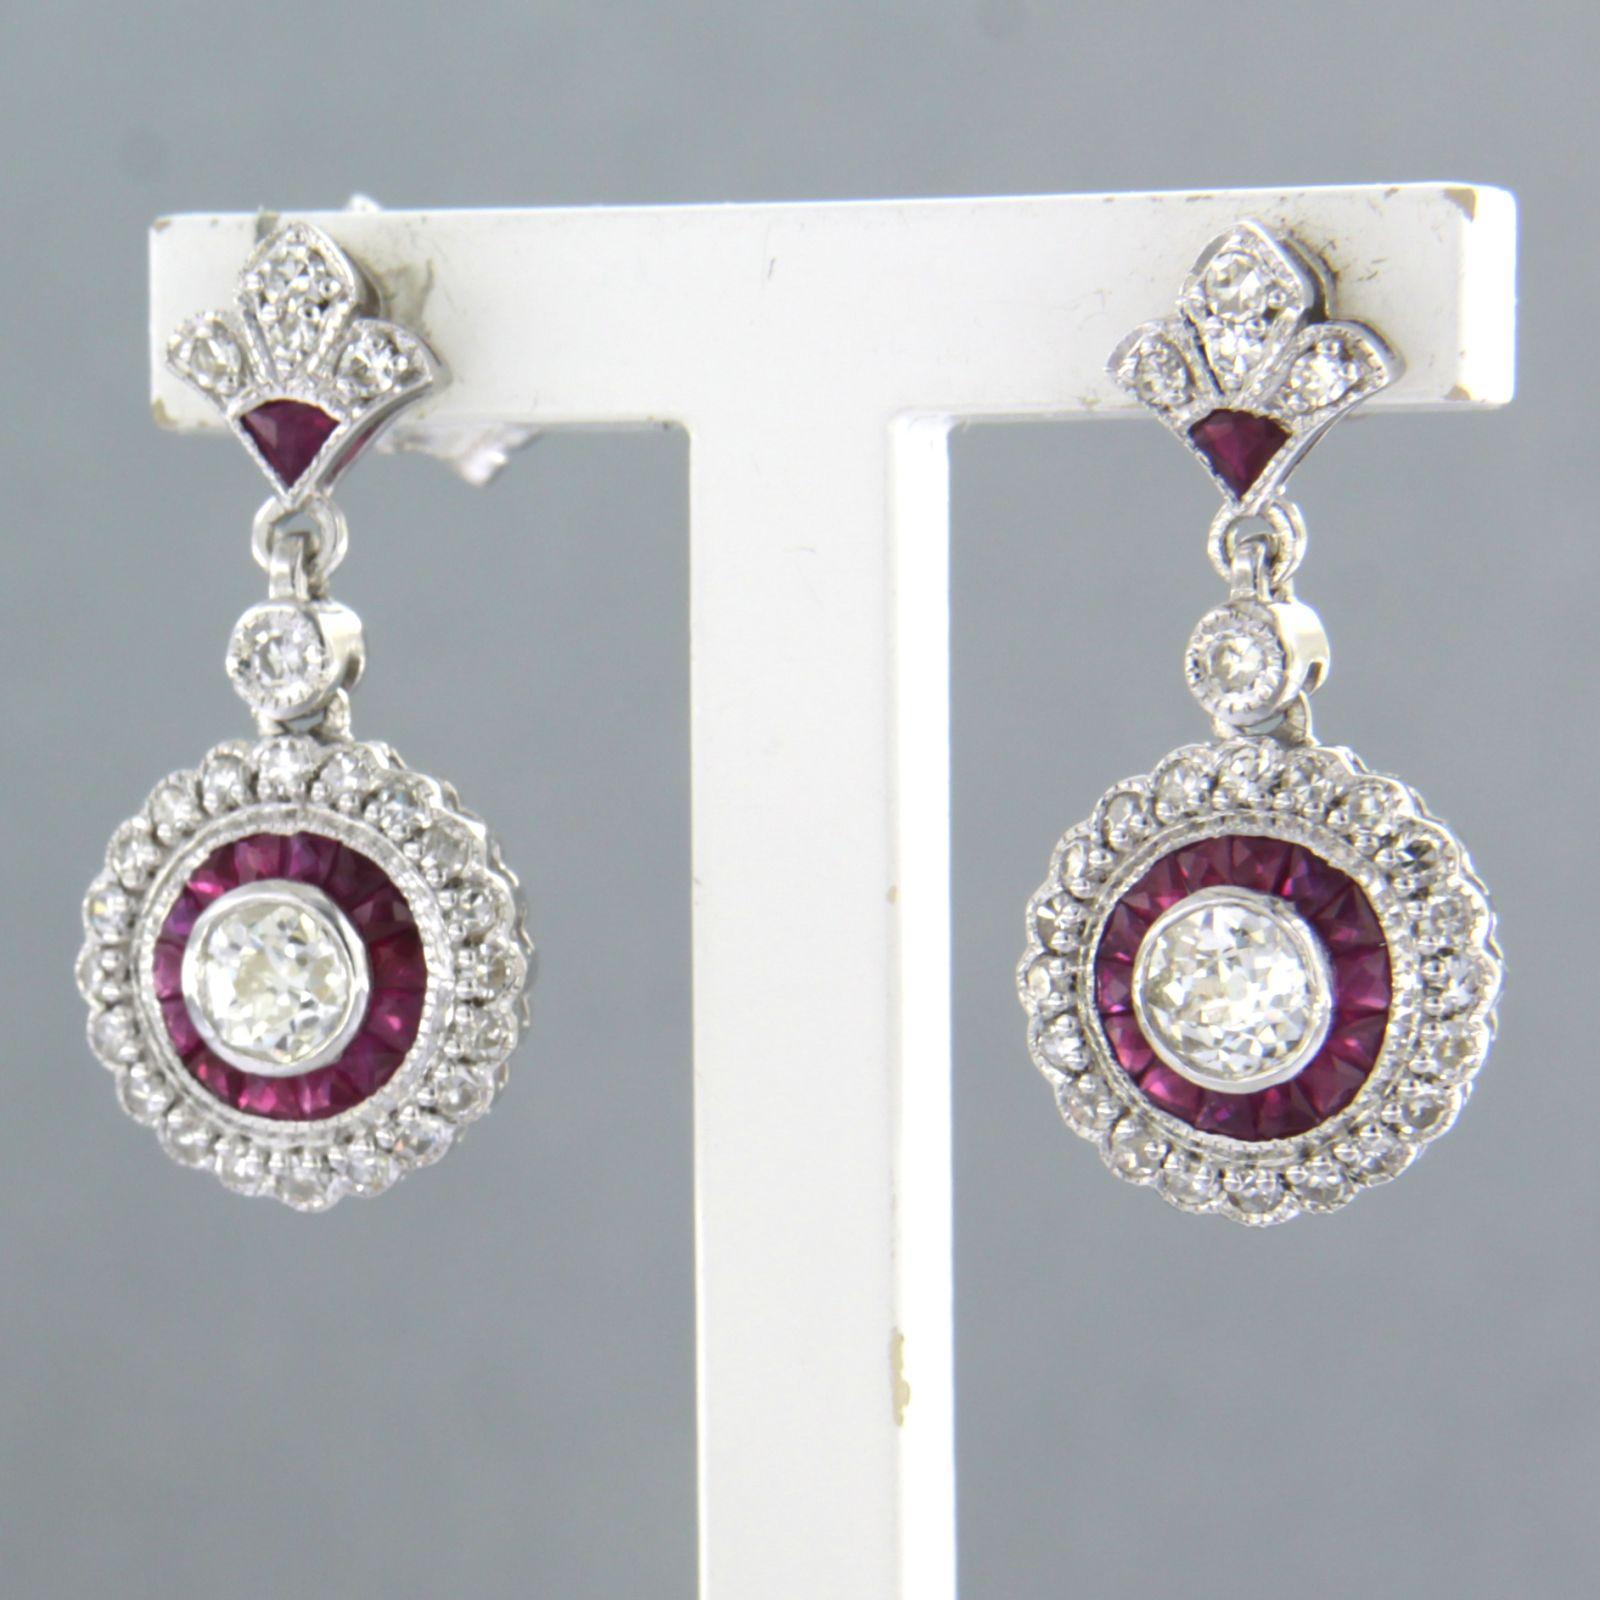 Old Mine Cut Earring set with ruby and diamonds 14k white gold